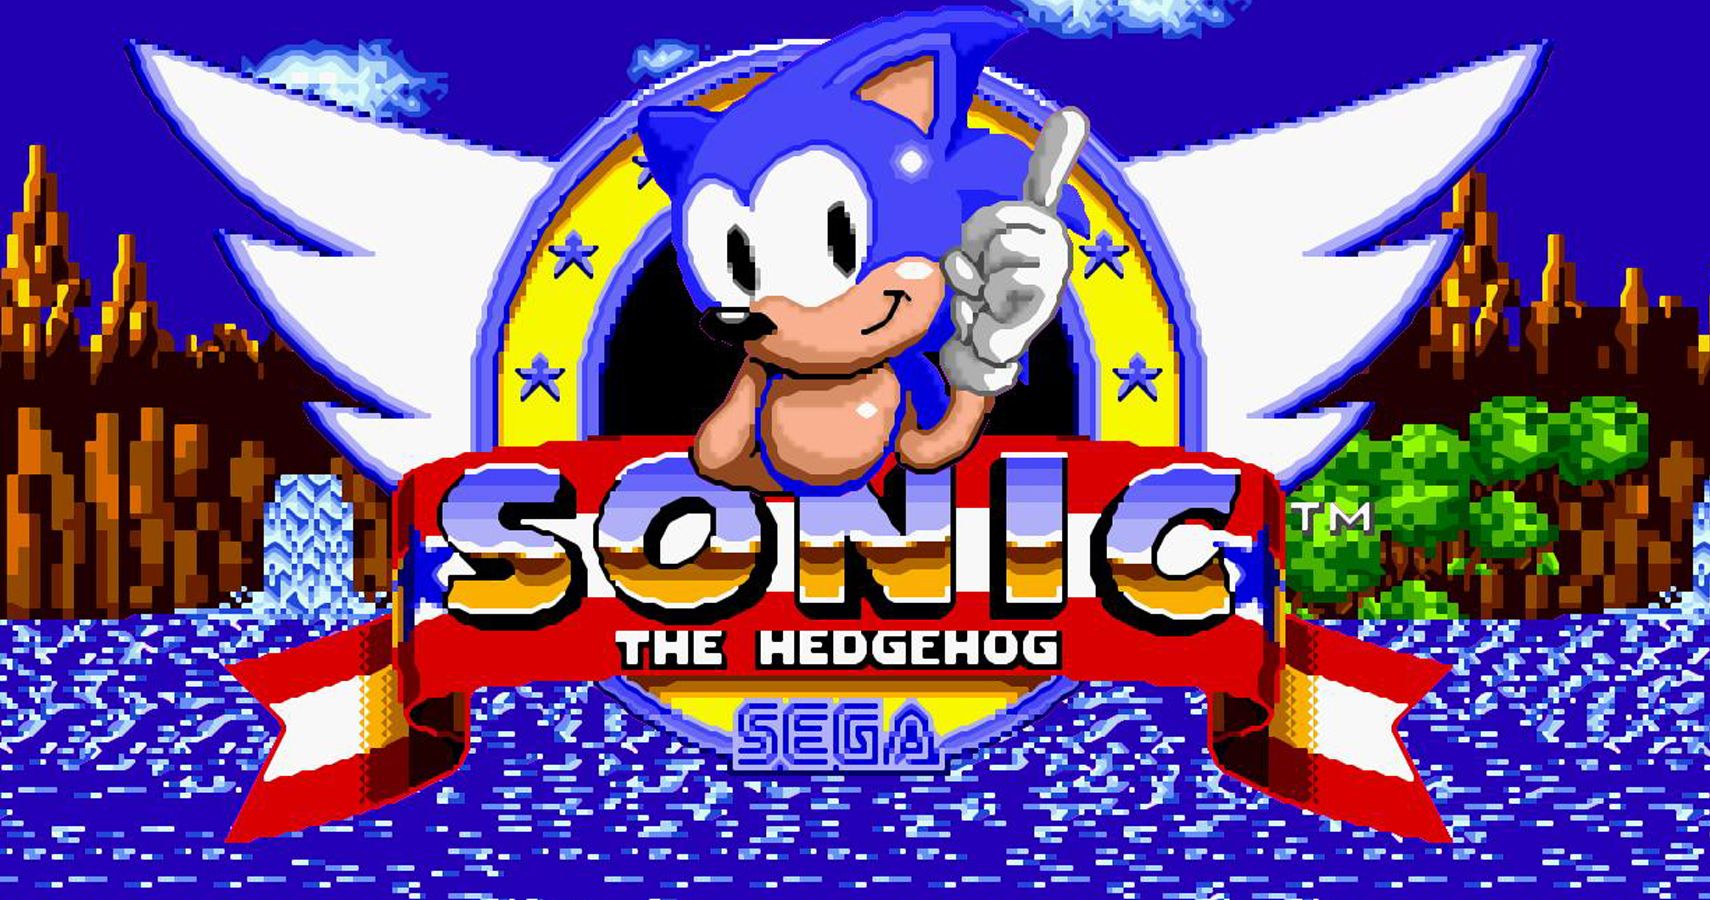 The best 12 Sonic the Hedgehog games, ranked - Polygon